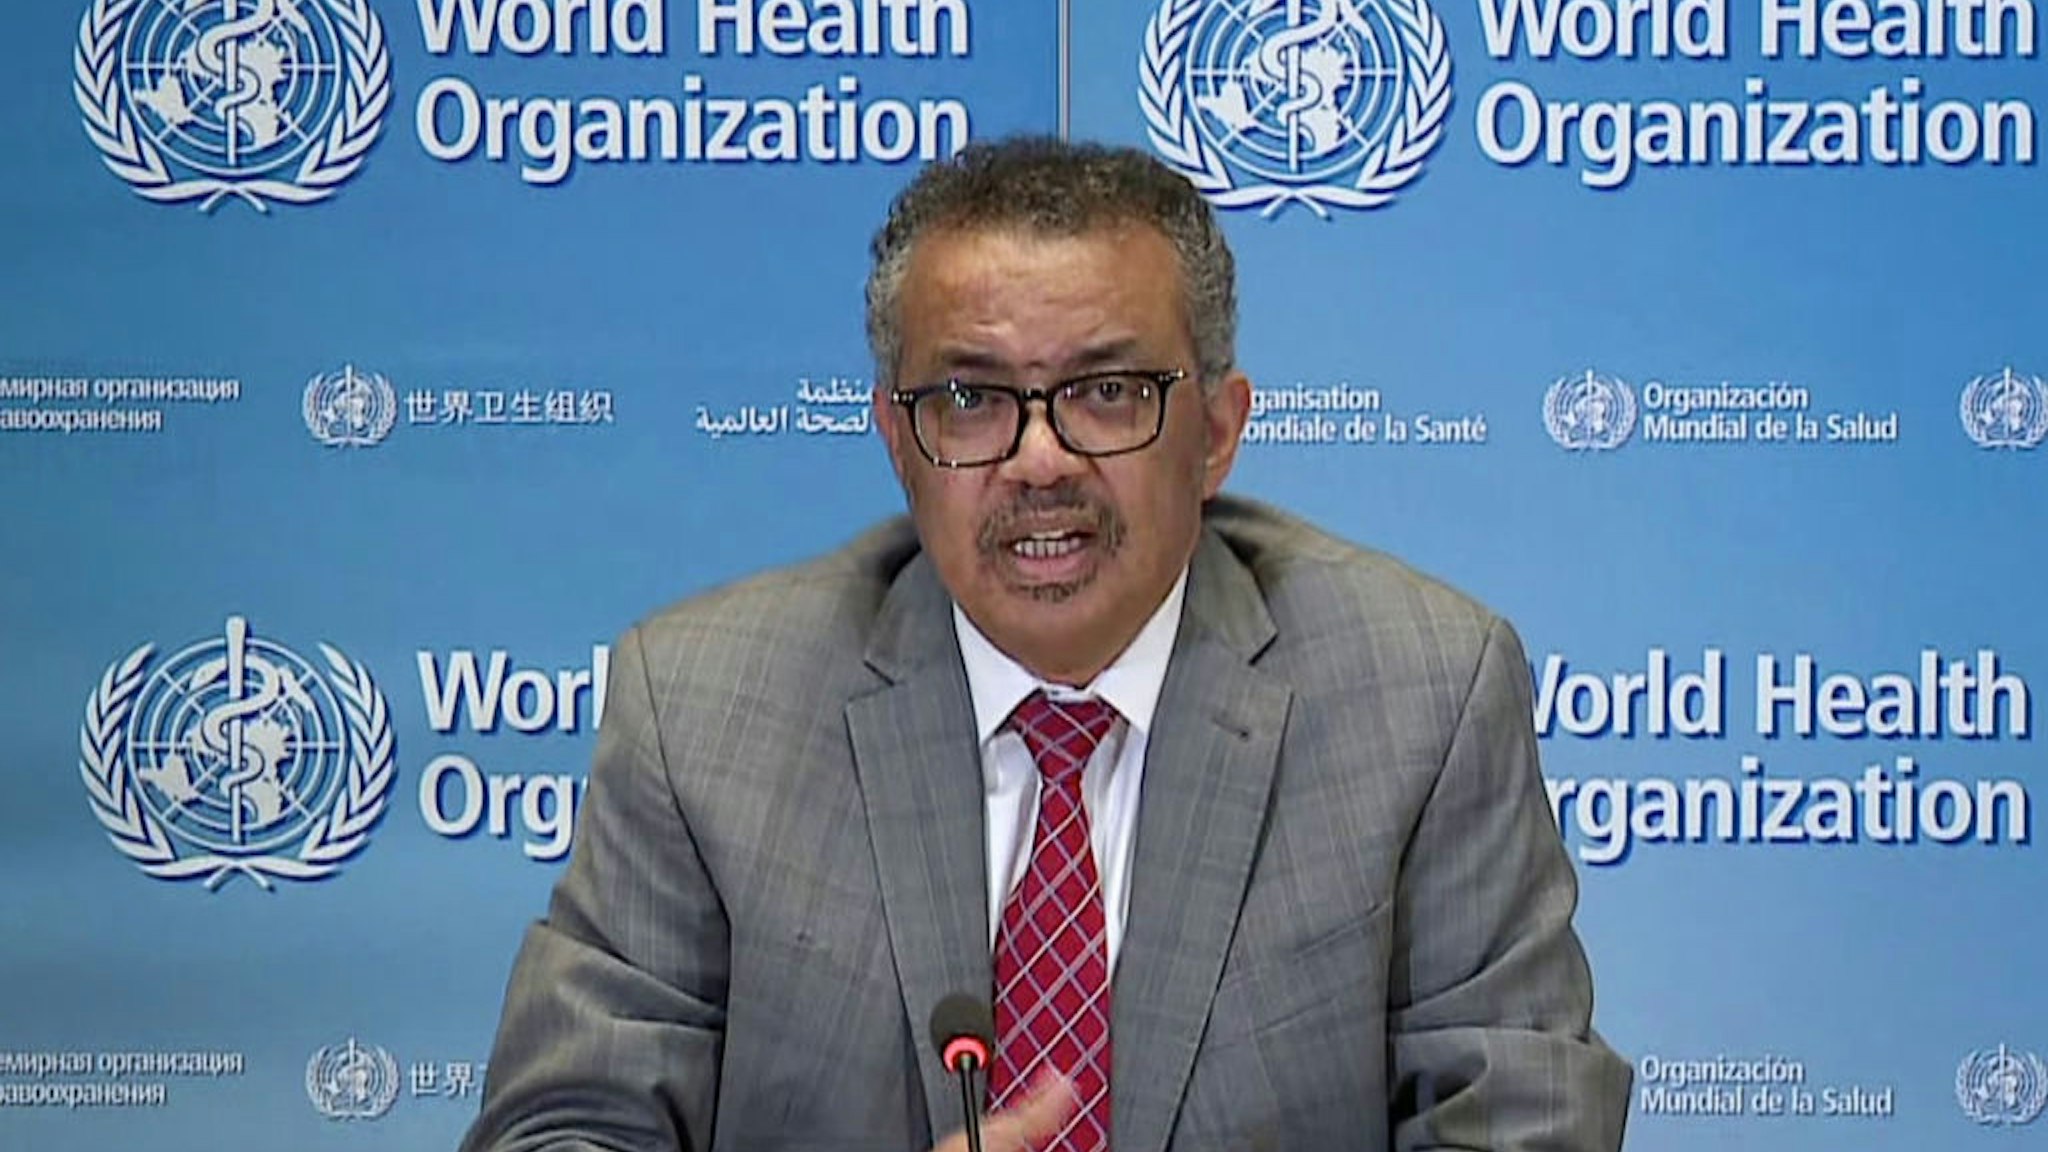 A TV grab taken from the World Health Organization website shows WHO Chief Tedros Adhanom Ghebreyesus via video link as he delivers a news briefing on COVID-19 (novel coronavirus) from the WHO headquarters in Geneva on March 30, 2020.